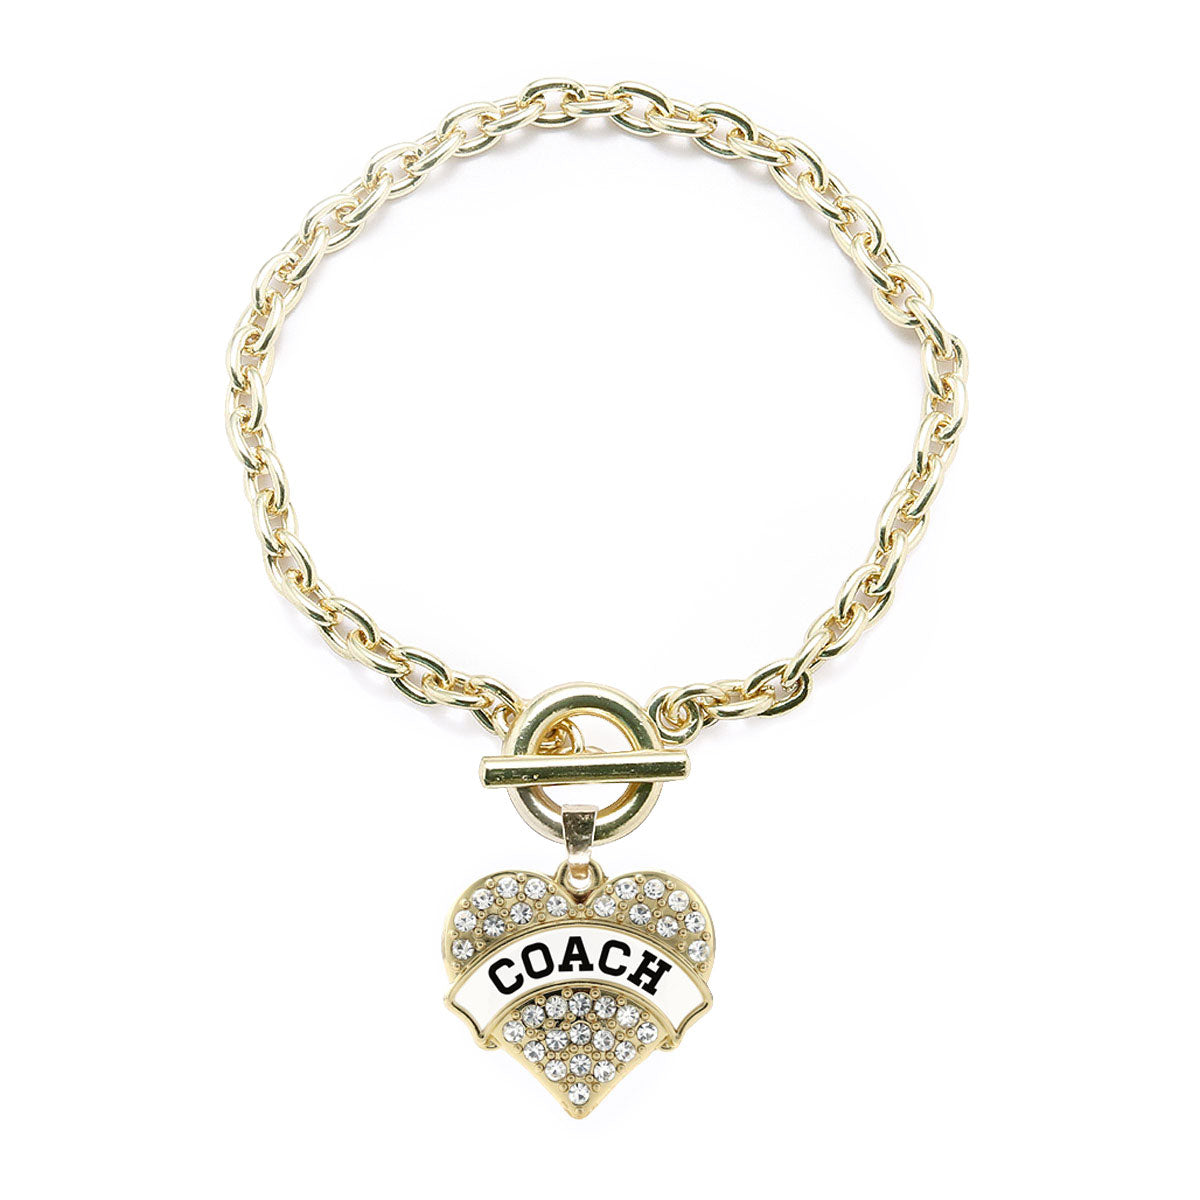 Gold Coach - White and Black Pave Heart Charm Toggle Bracelet